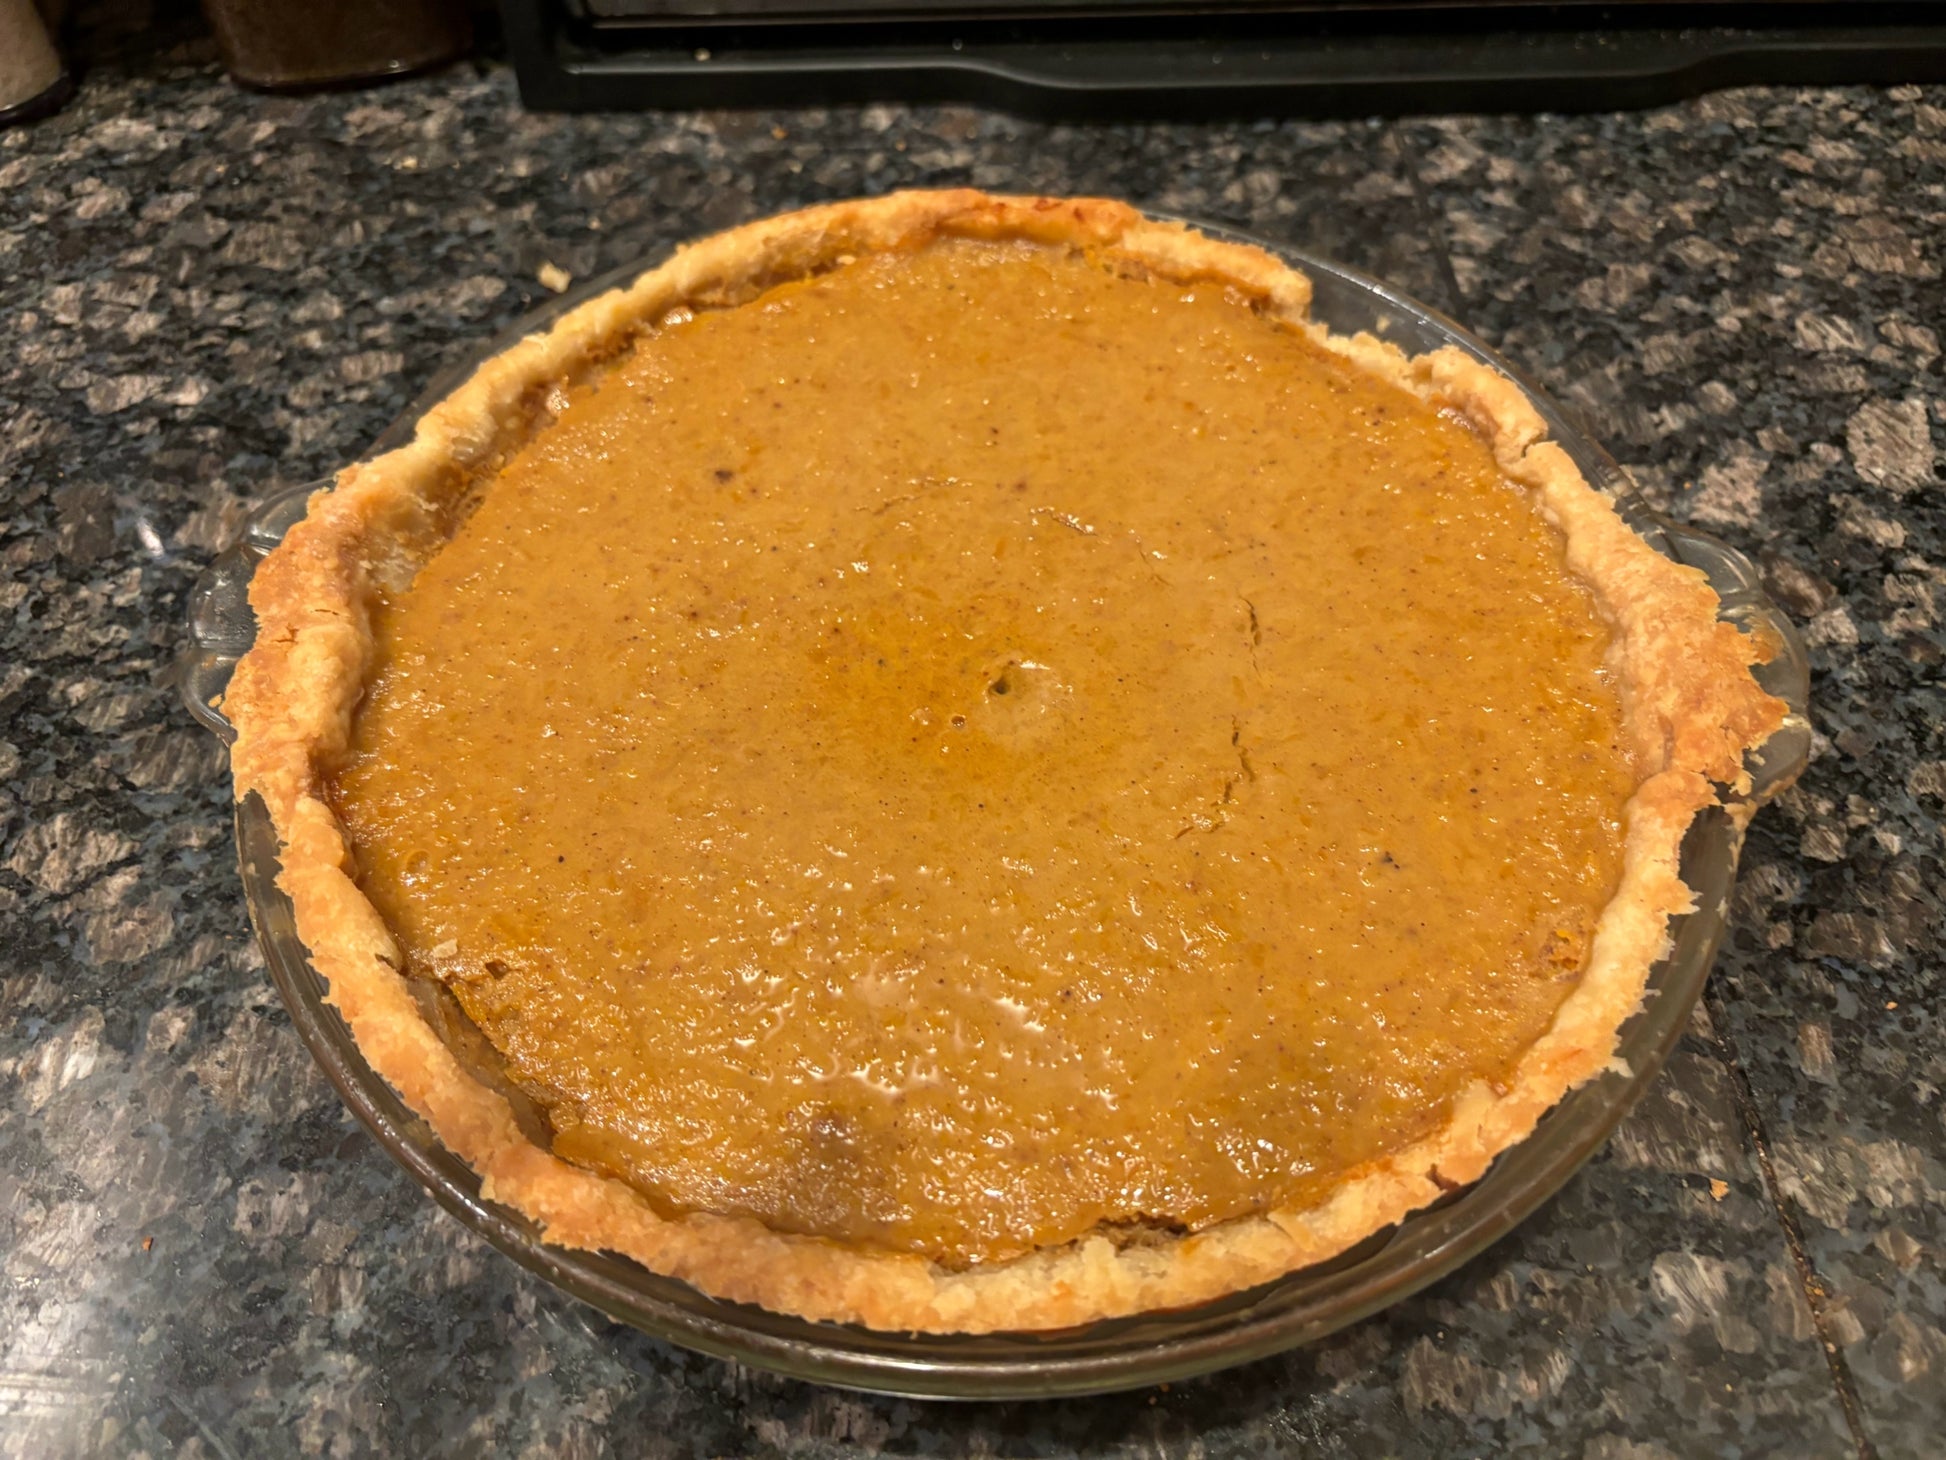 Fully Baked Local Holiday Pies (Apple, Pumpkin, Pecan)